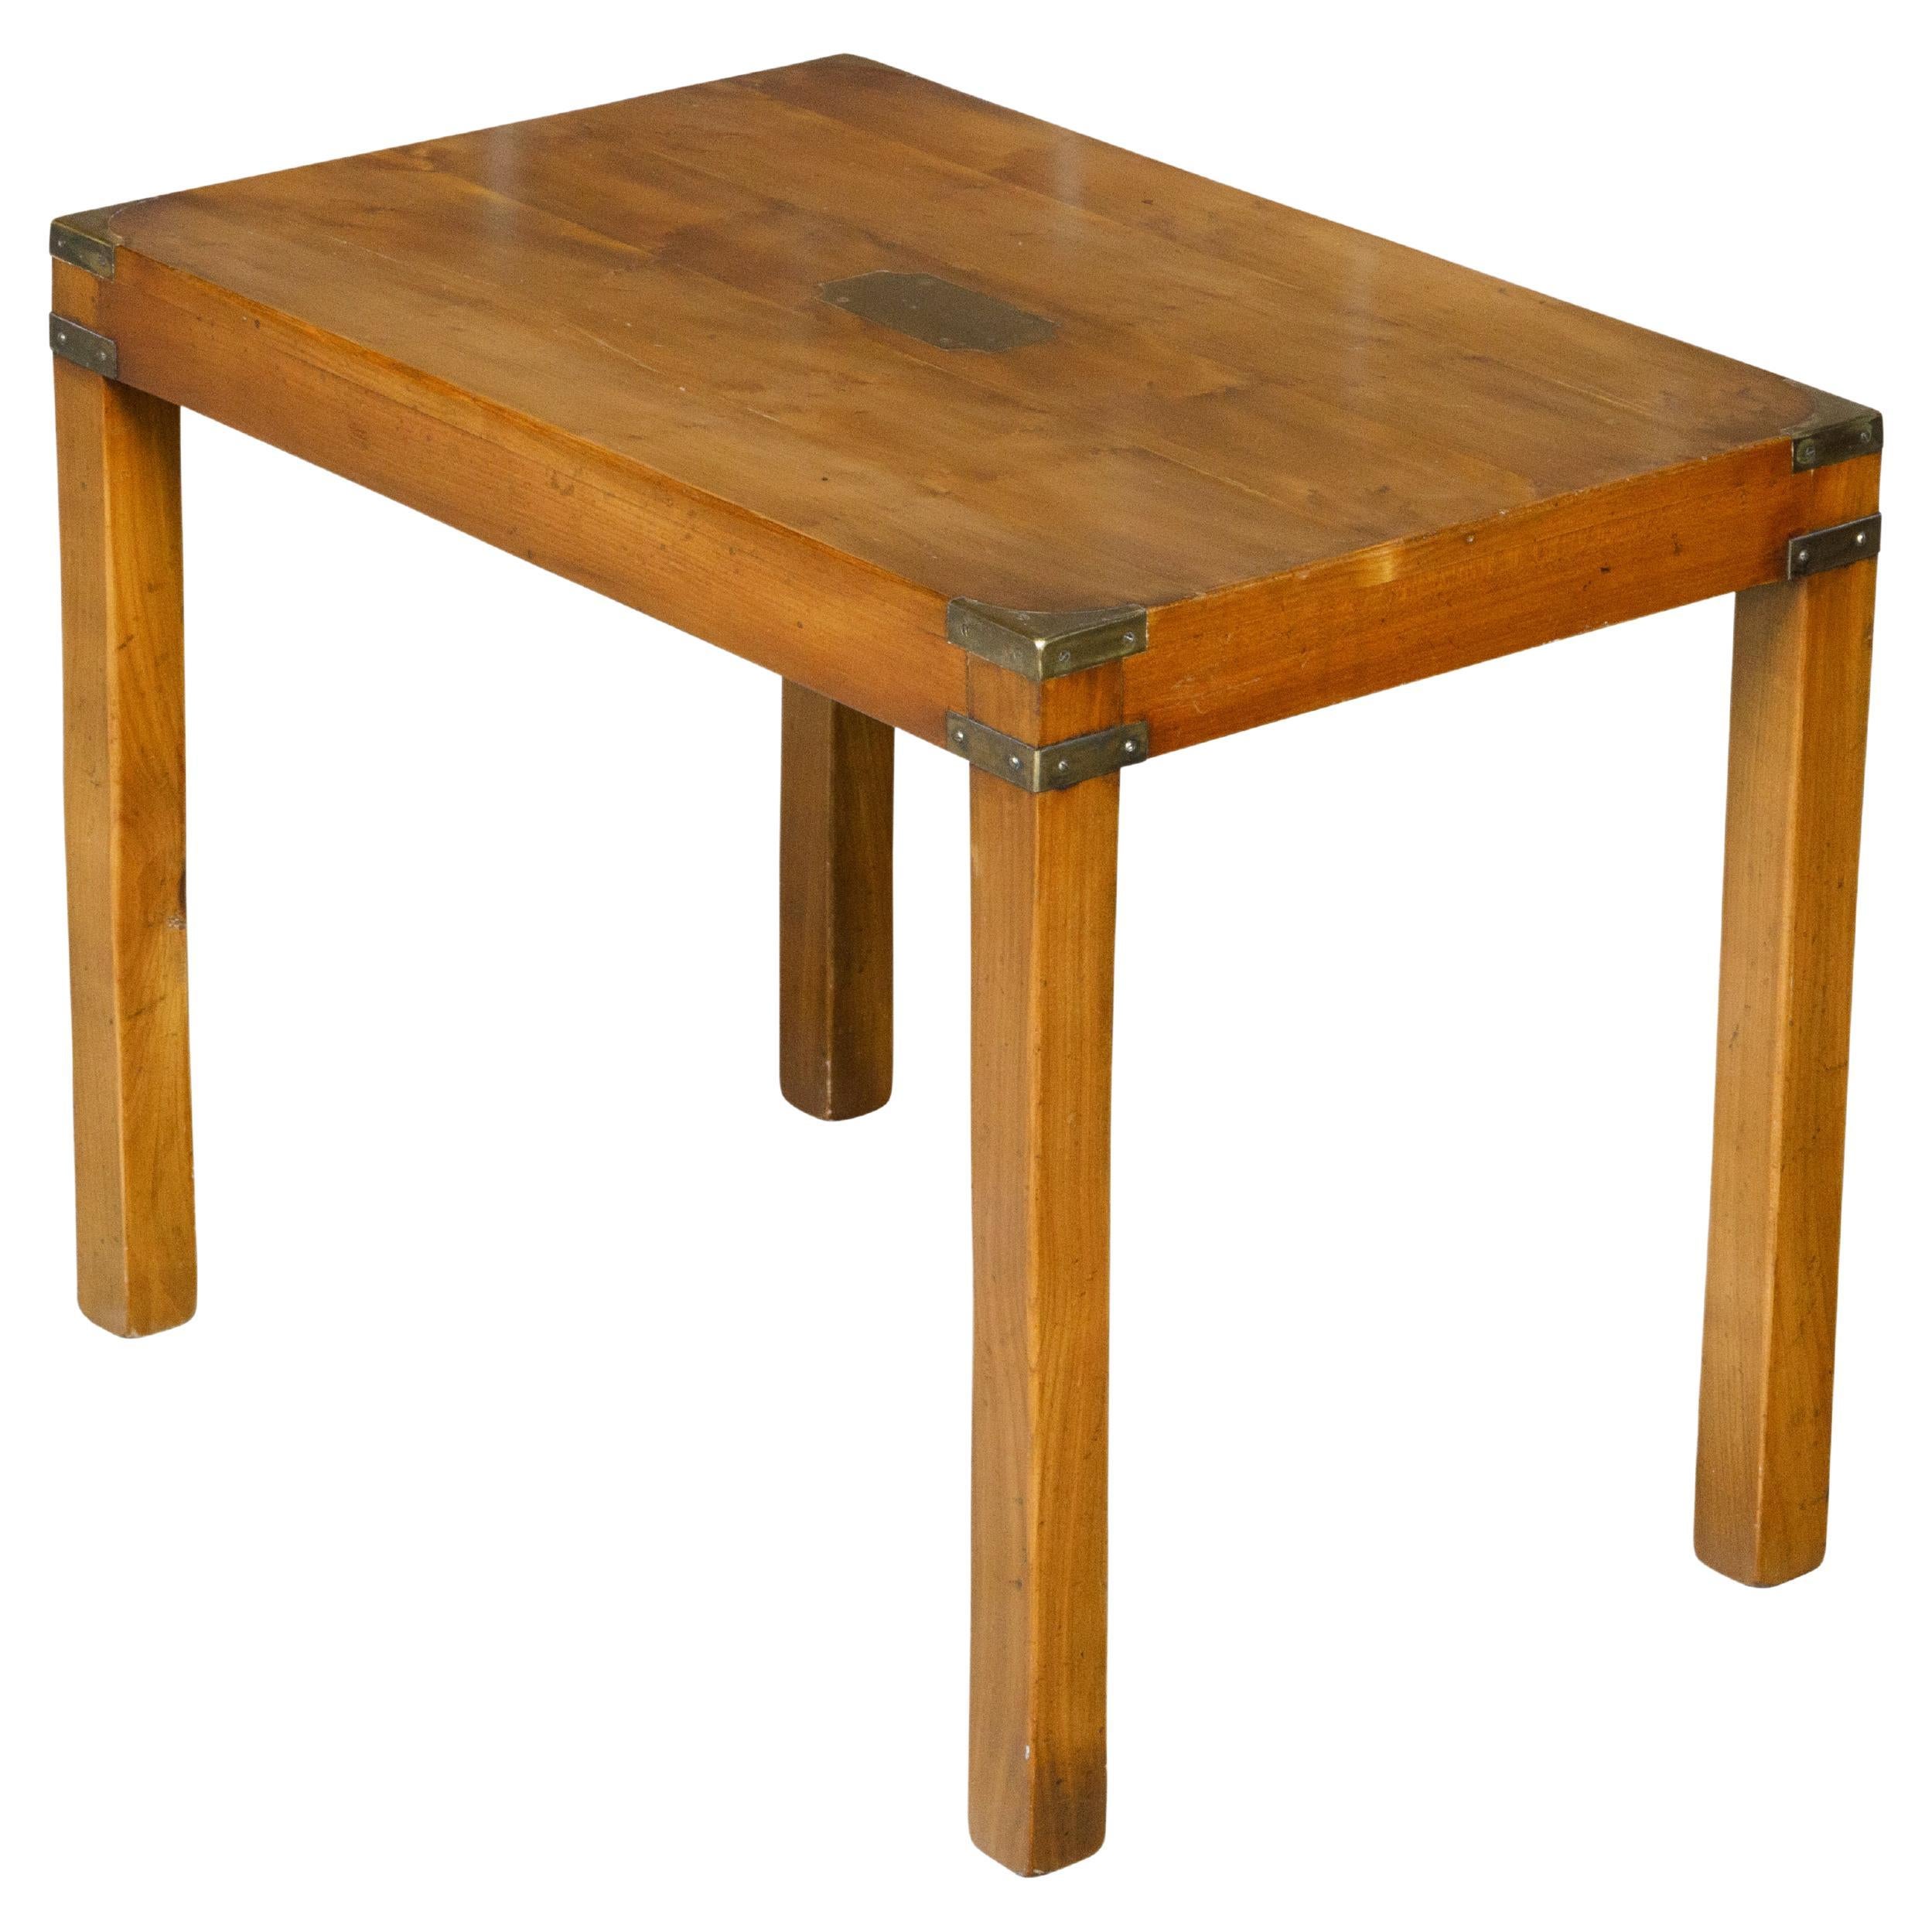 English Campaign Yew Wood 1920s Side Table with Brass Accents and Straight Legs For Sale